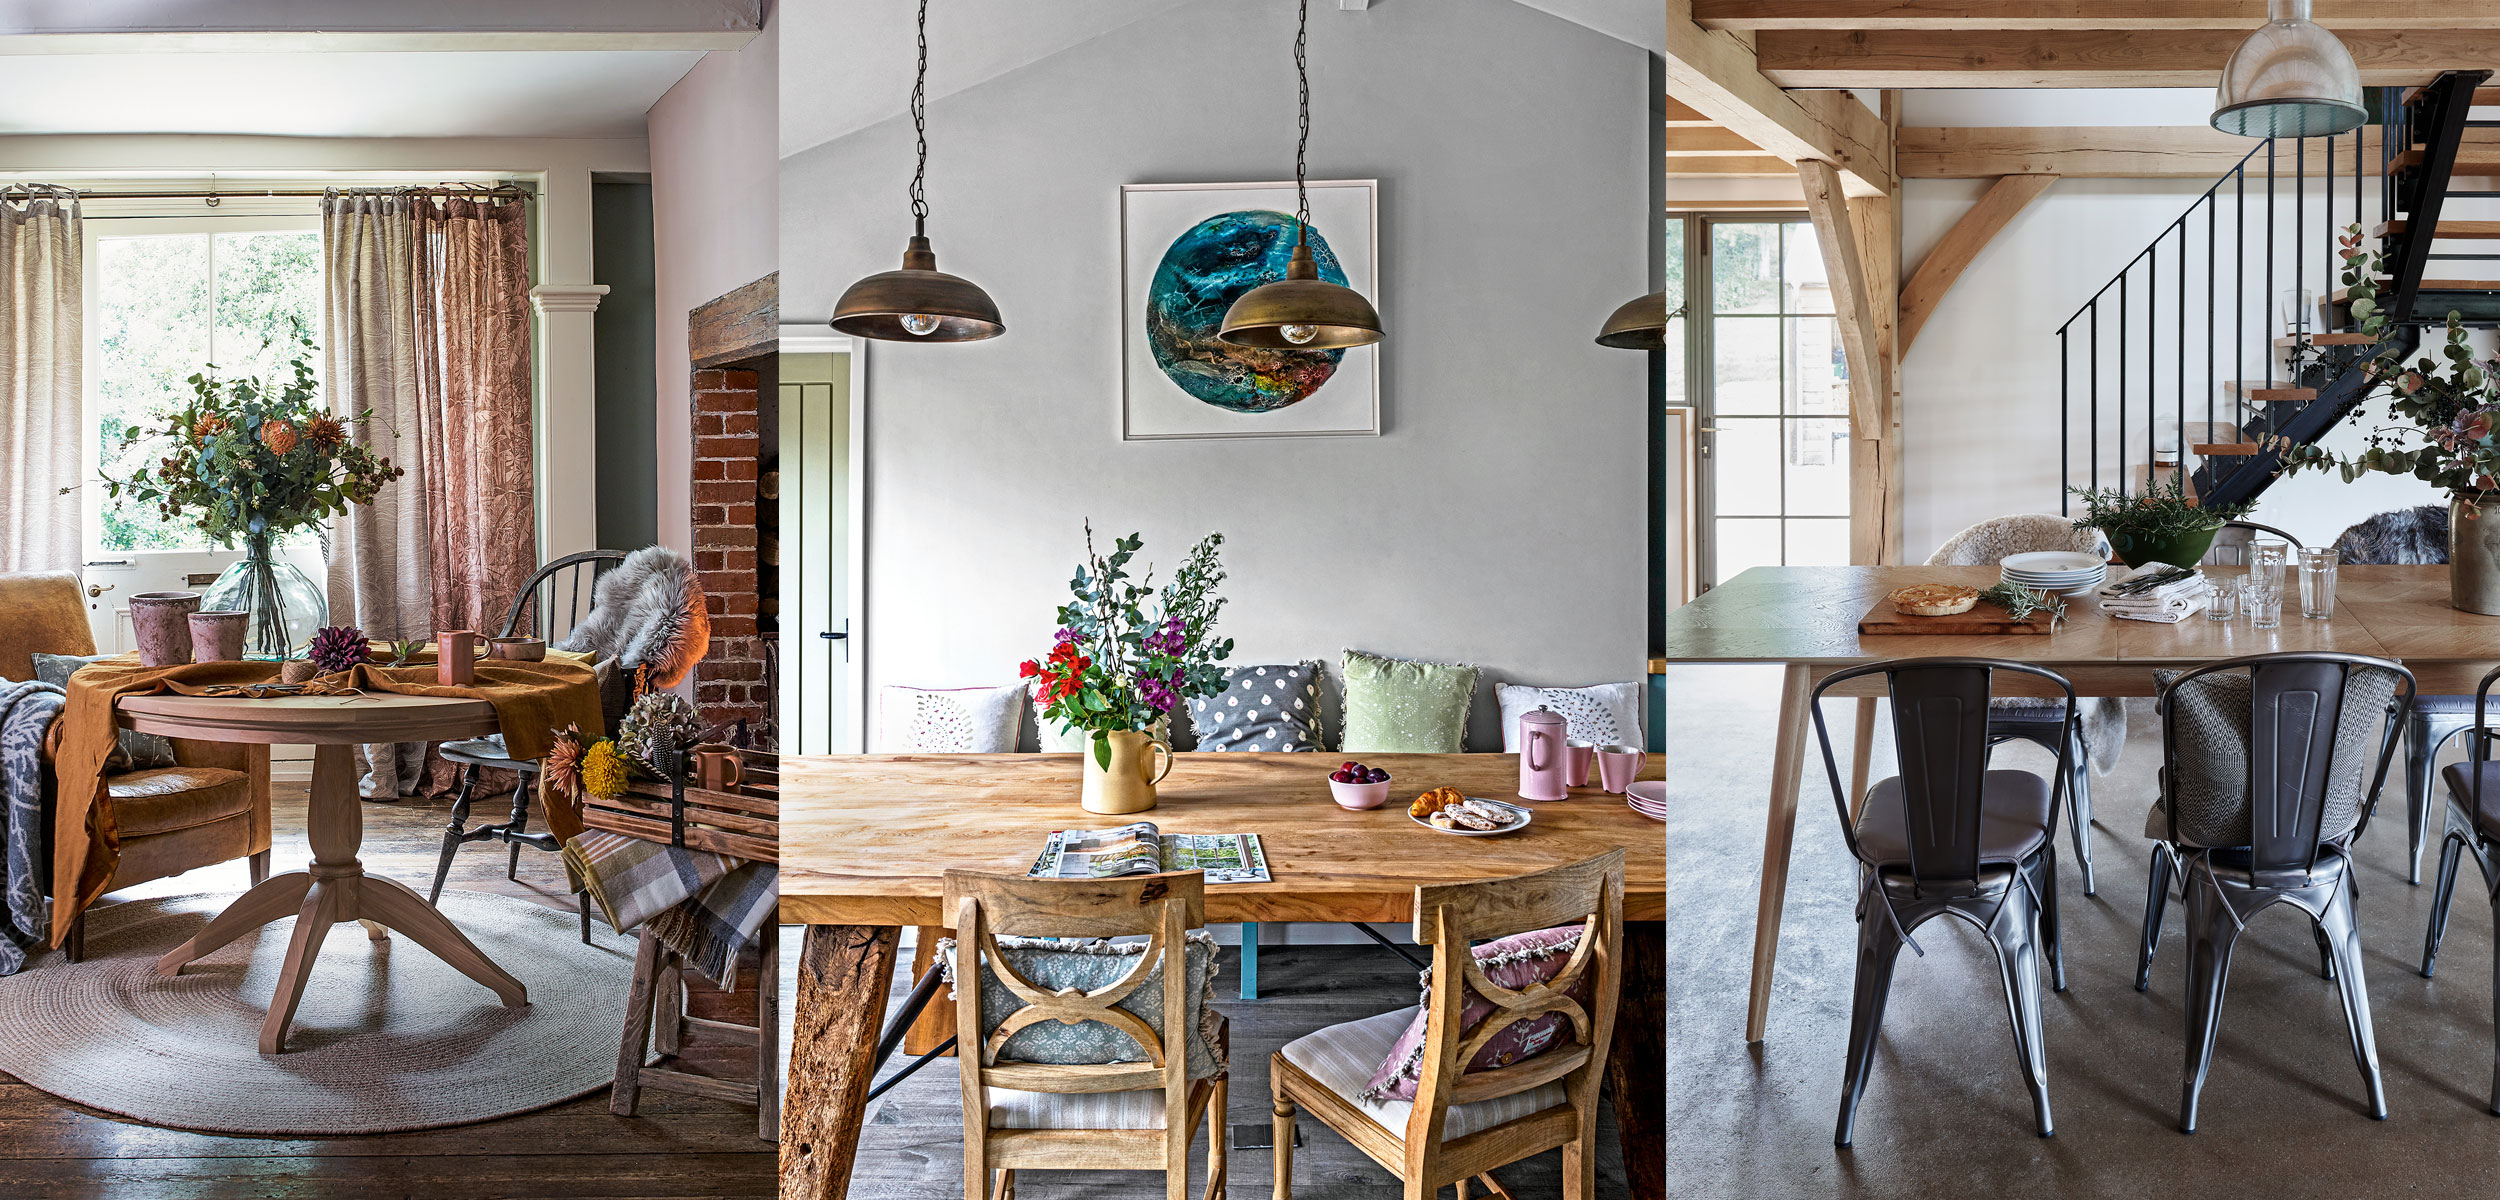 Rustic Dining Room With Whte Wallsideas